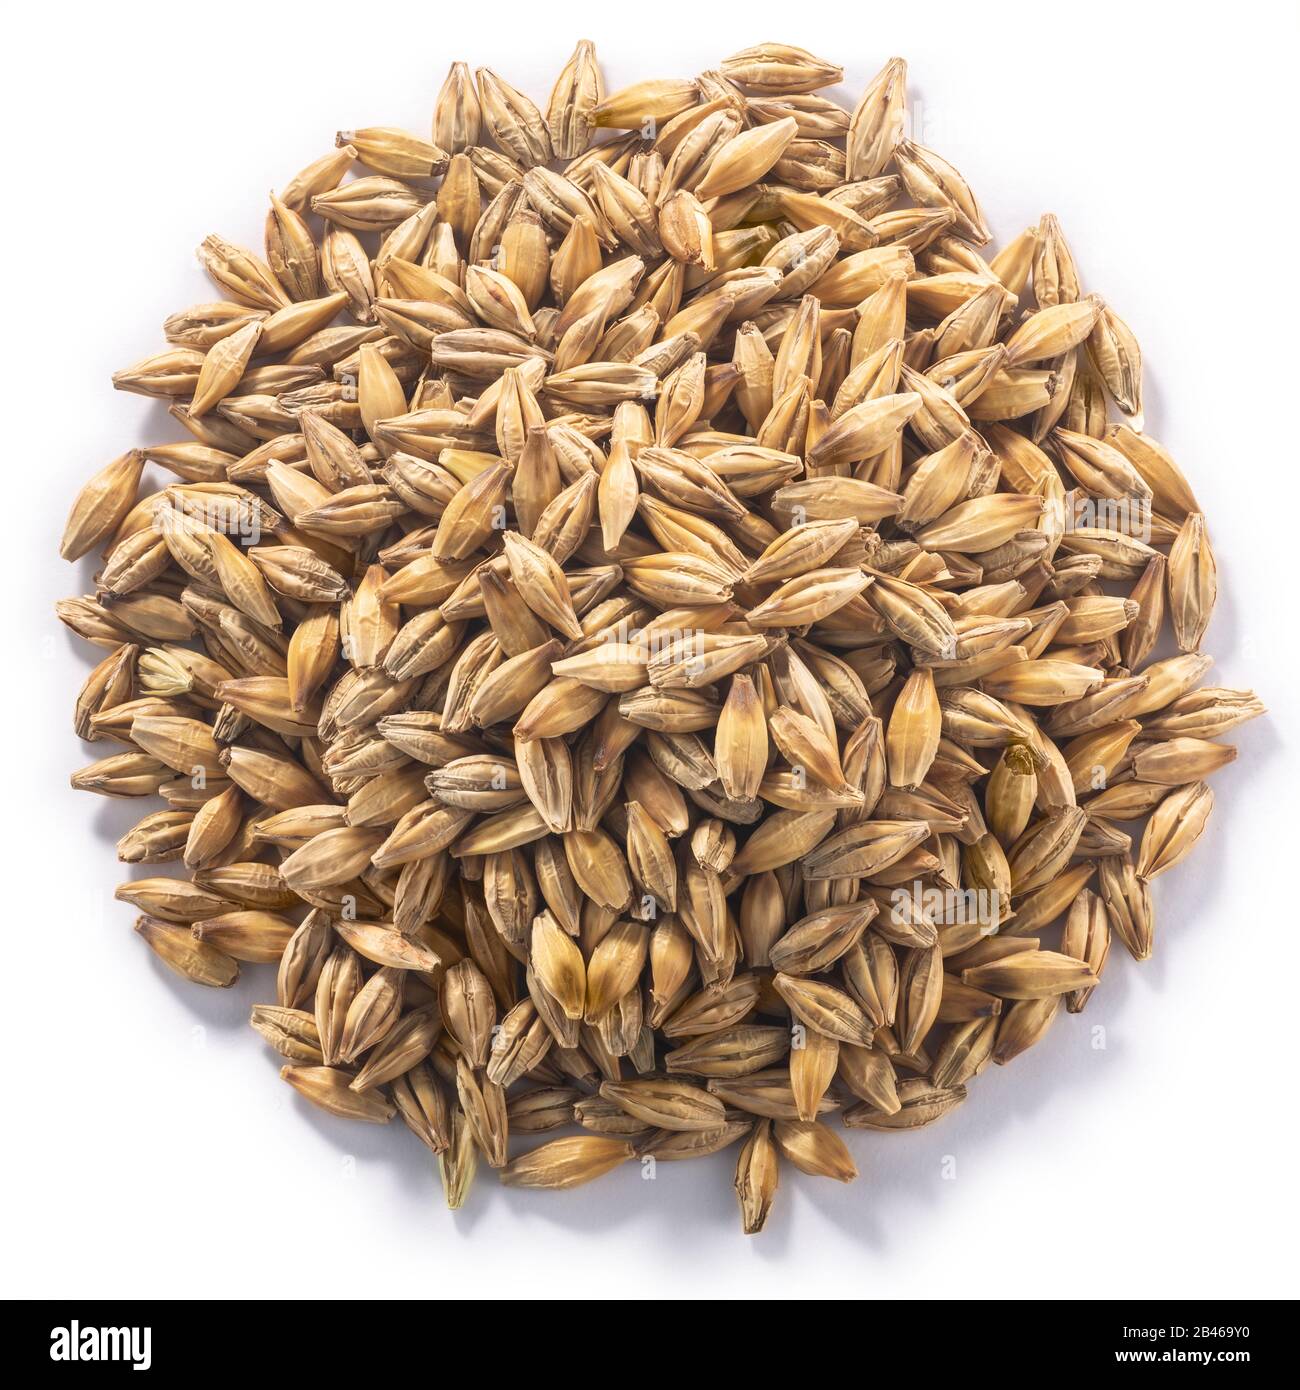 Pile of unhulled Barley (Hordeum vulgare seeds), isolated, top view Stock Photo